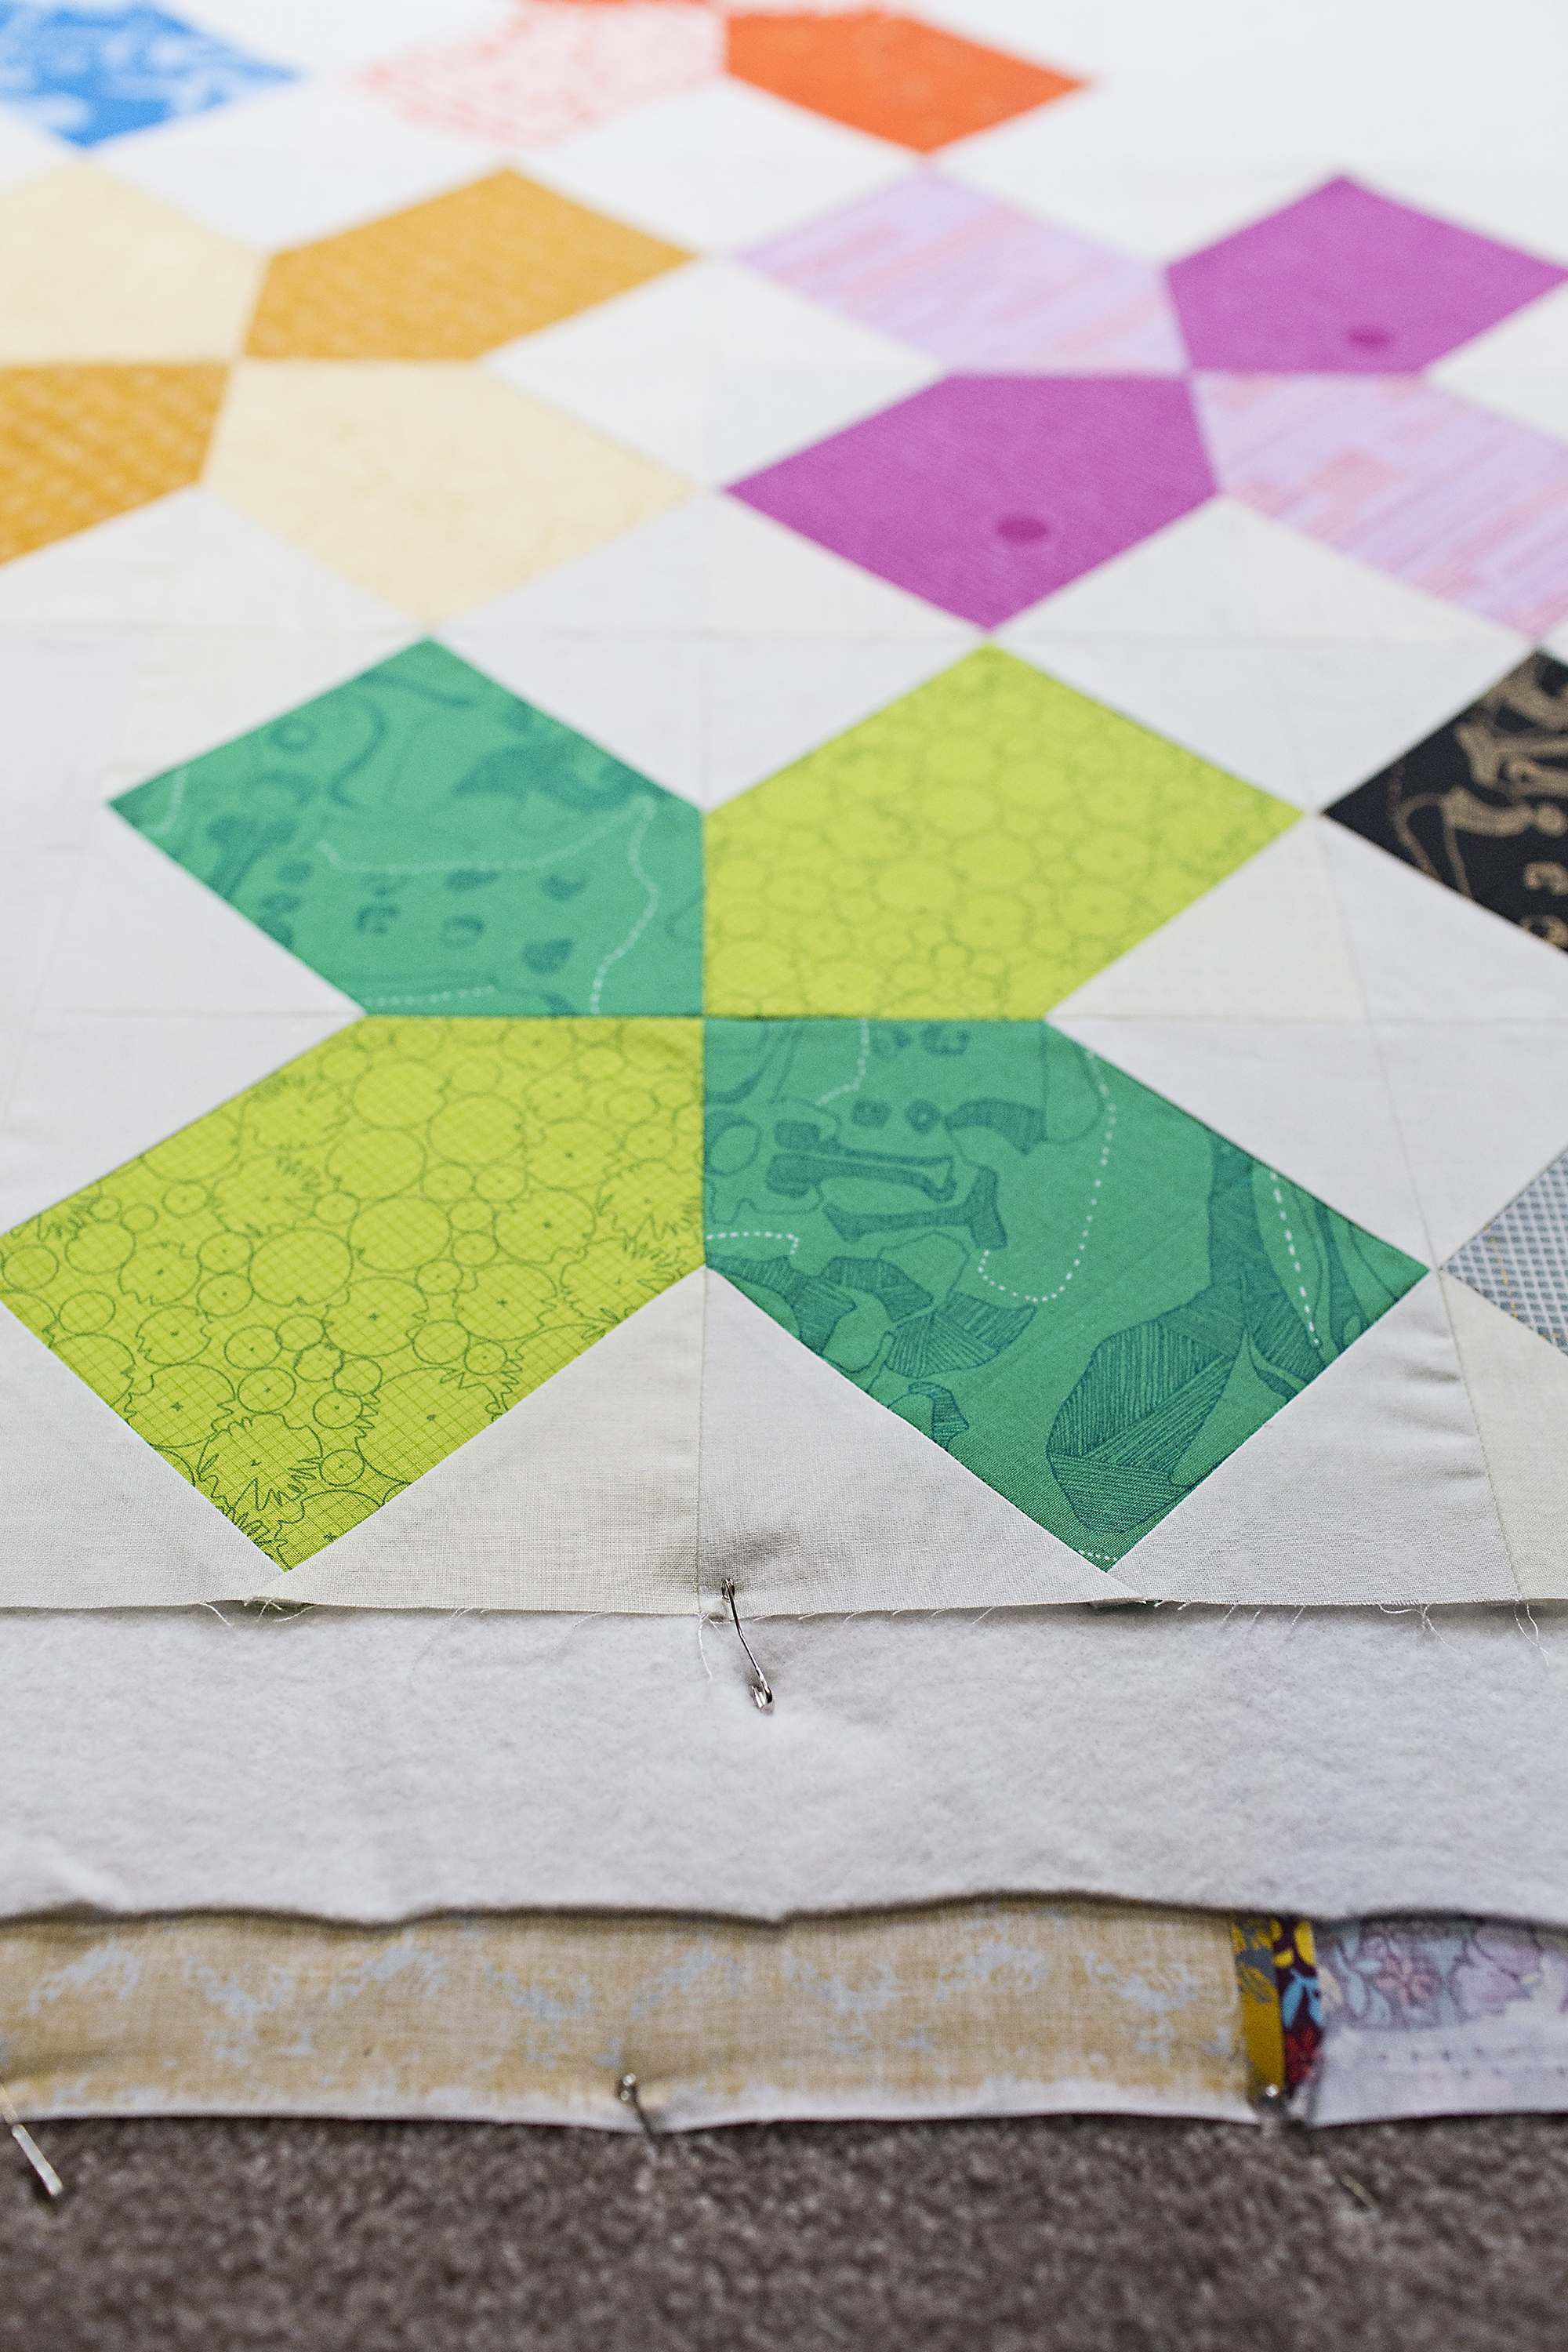 This is the #1 basting method for quilts. (Say GOODBYE to pins